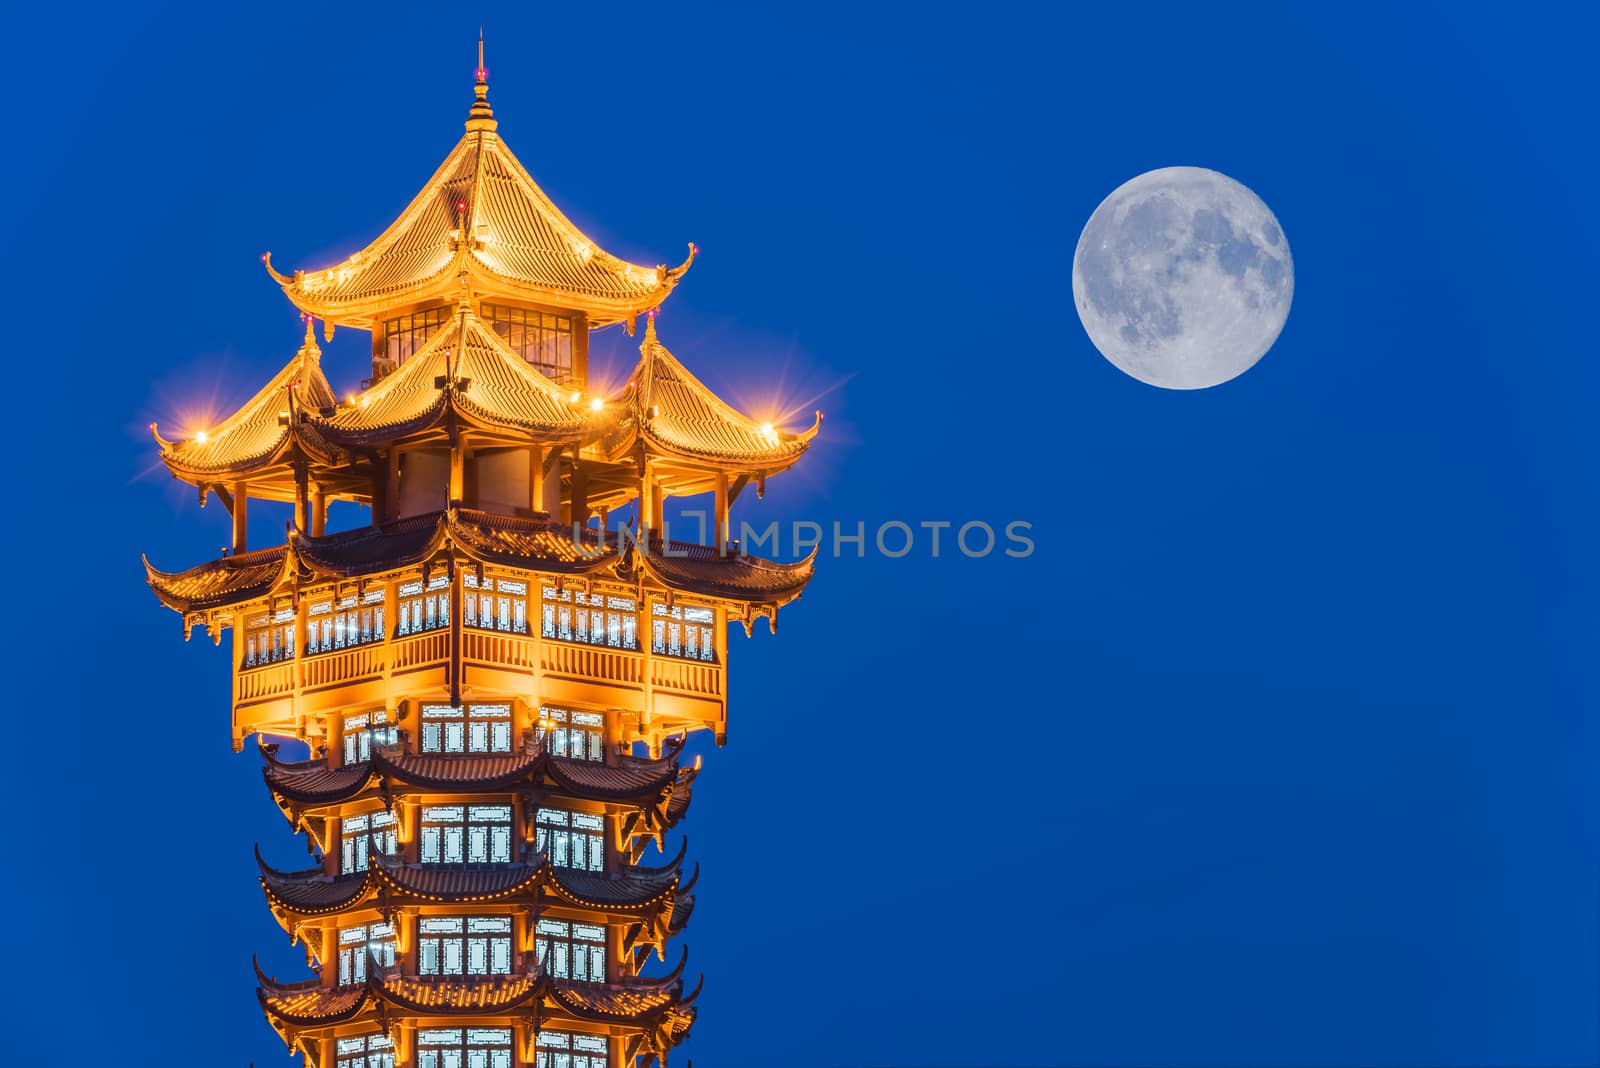 Jiutian traditional tower illuminated at night with full moon in the background, Chengdu, China